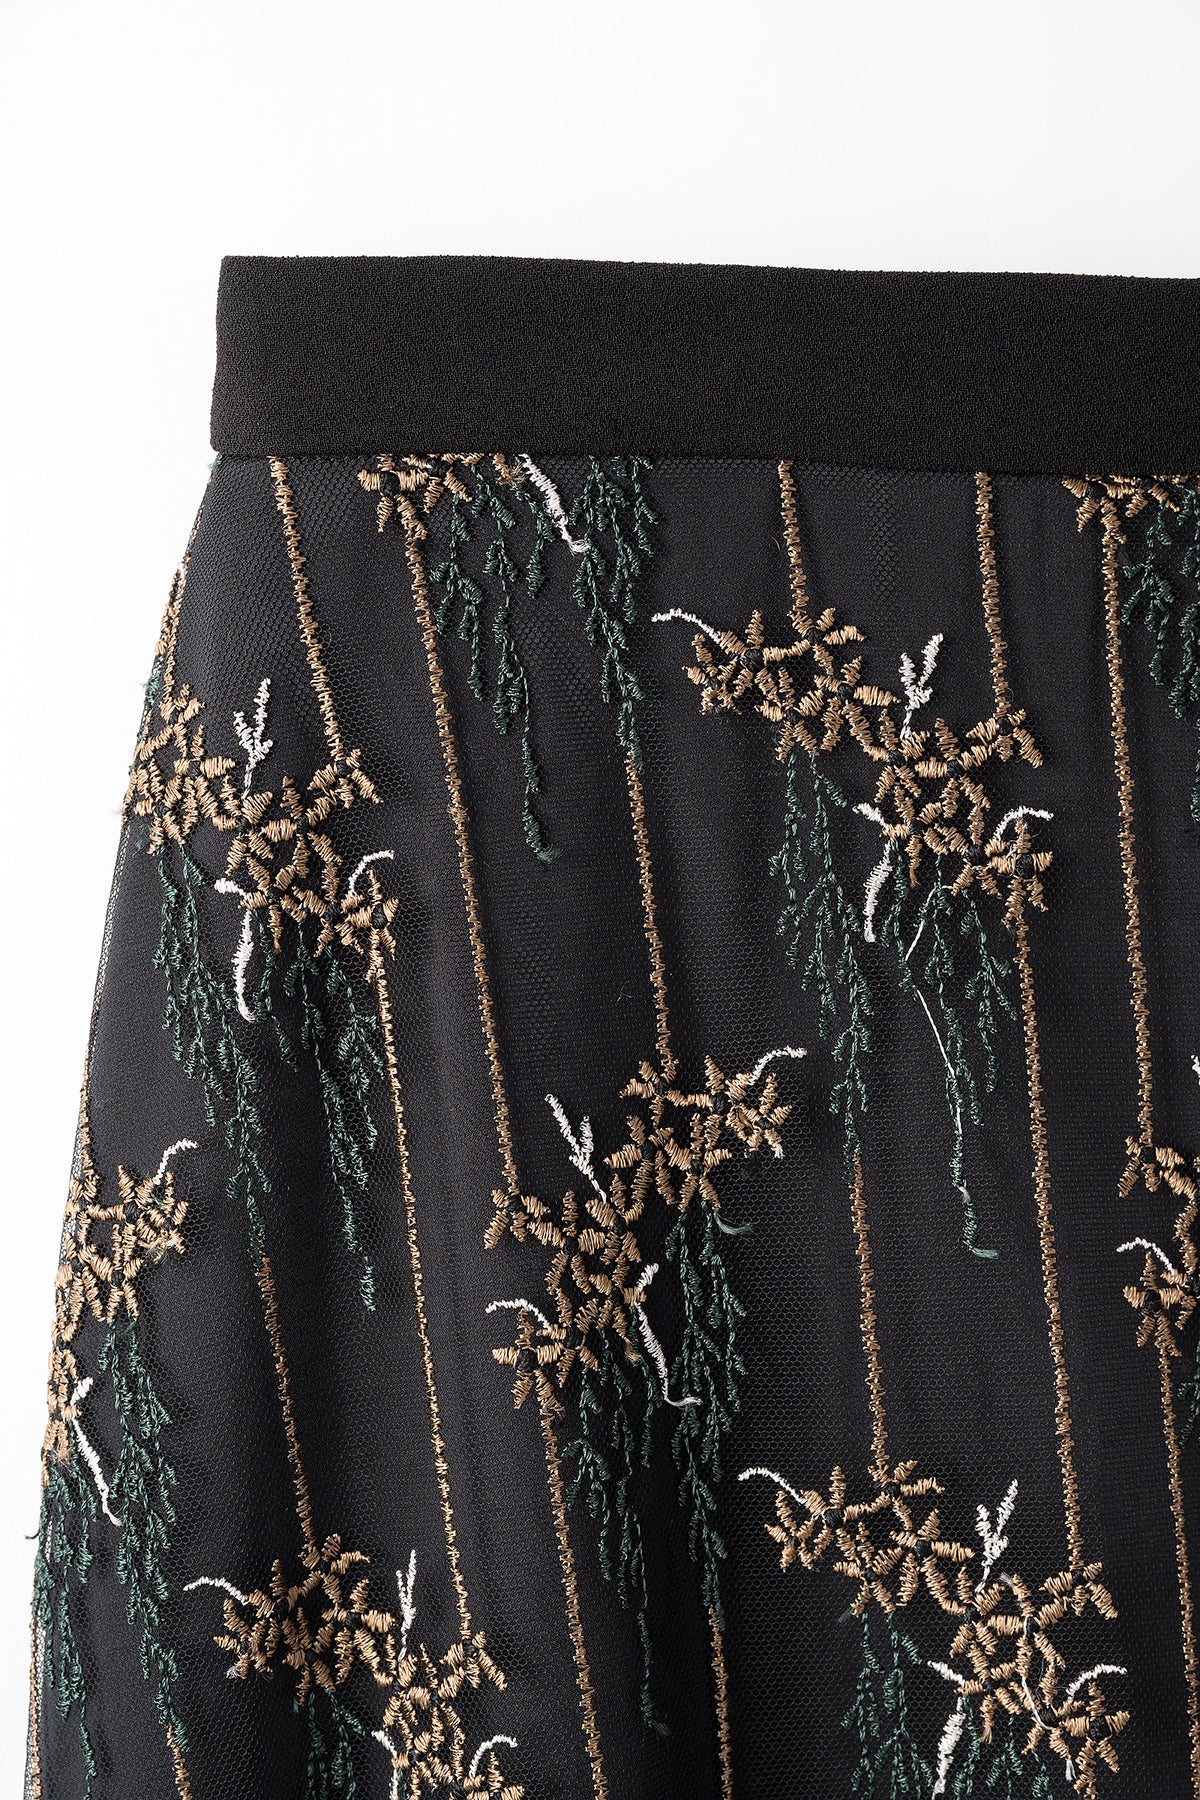 Everlasting embroidery lace skirt (Black)